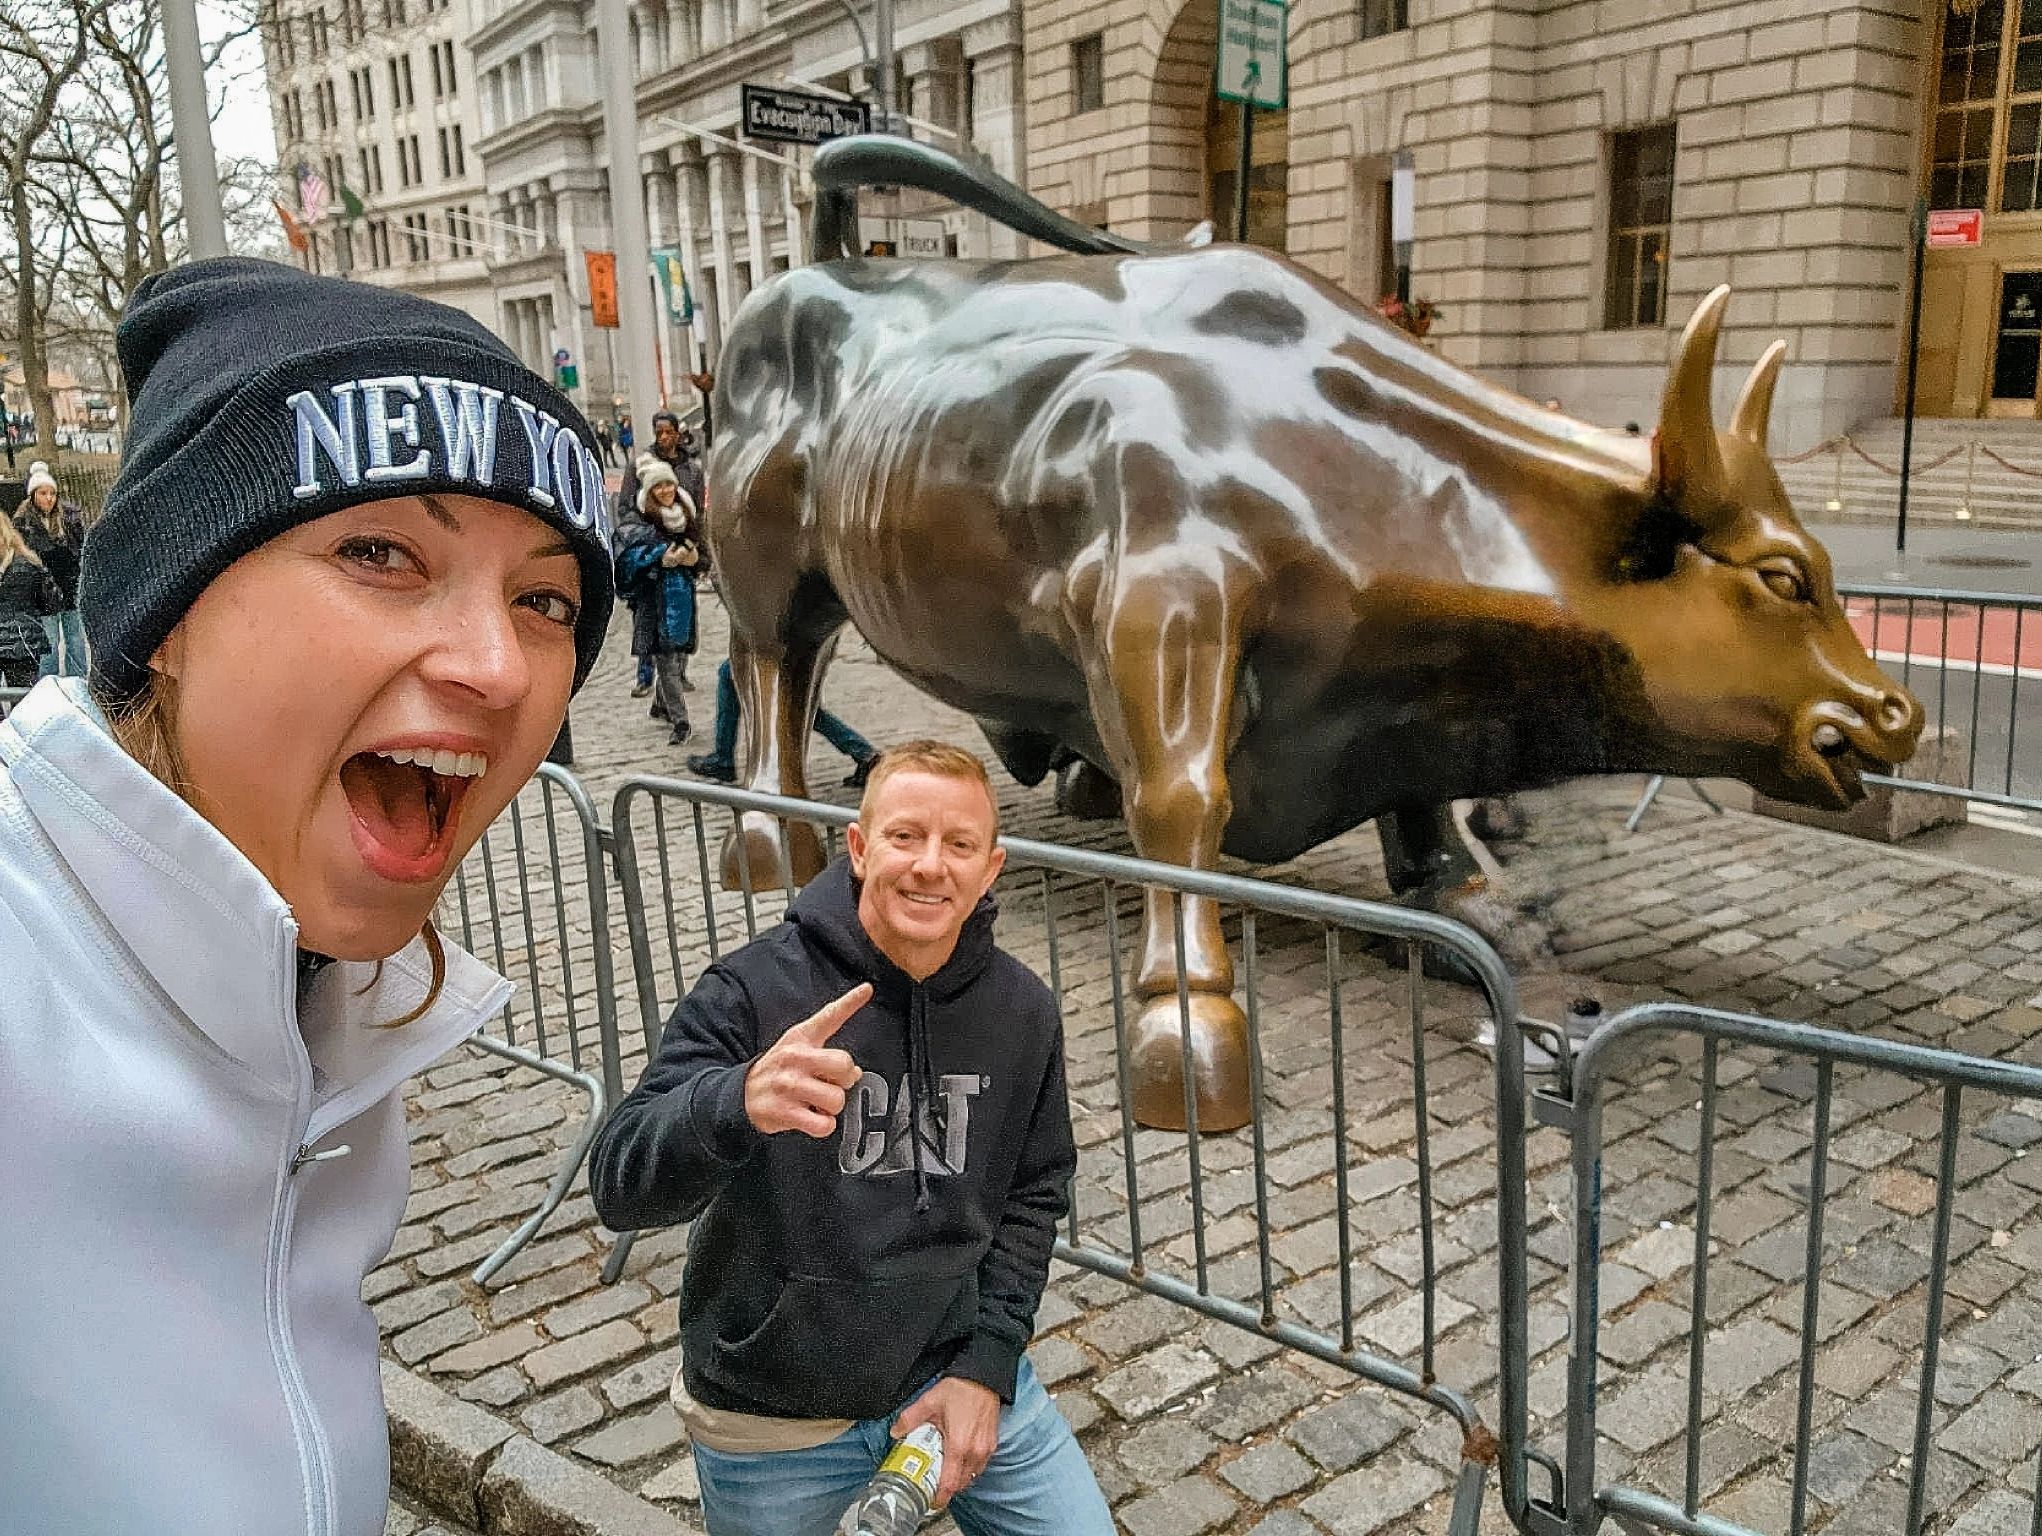 Man and Woman standing in front of the iconic Charging Bull in New York City